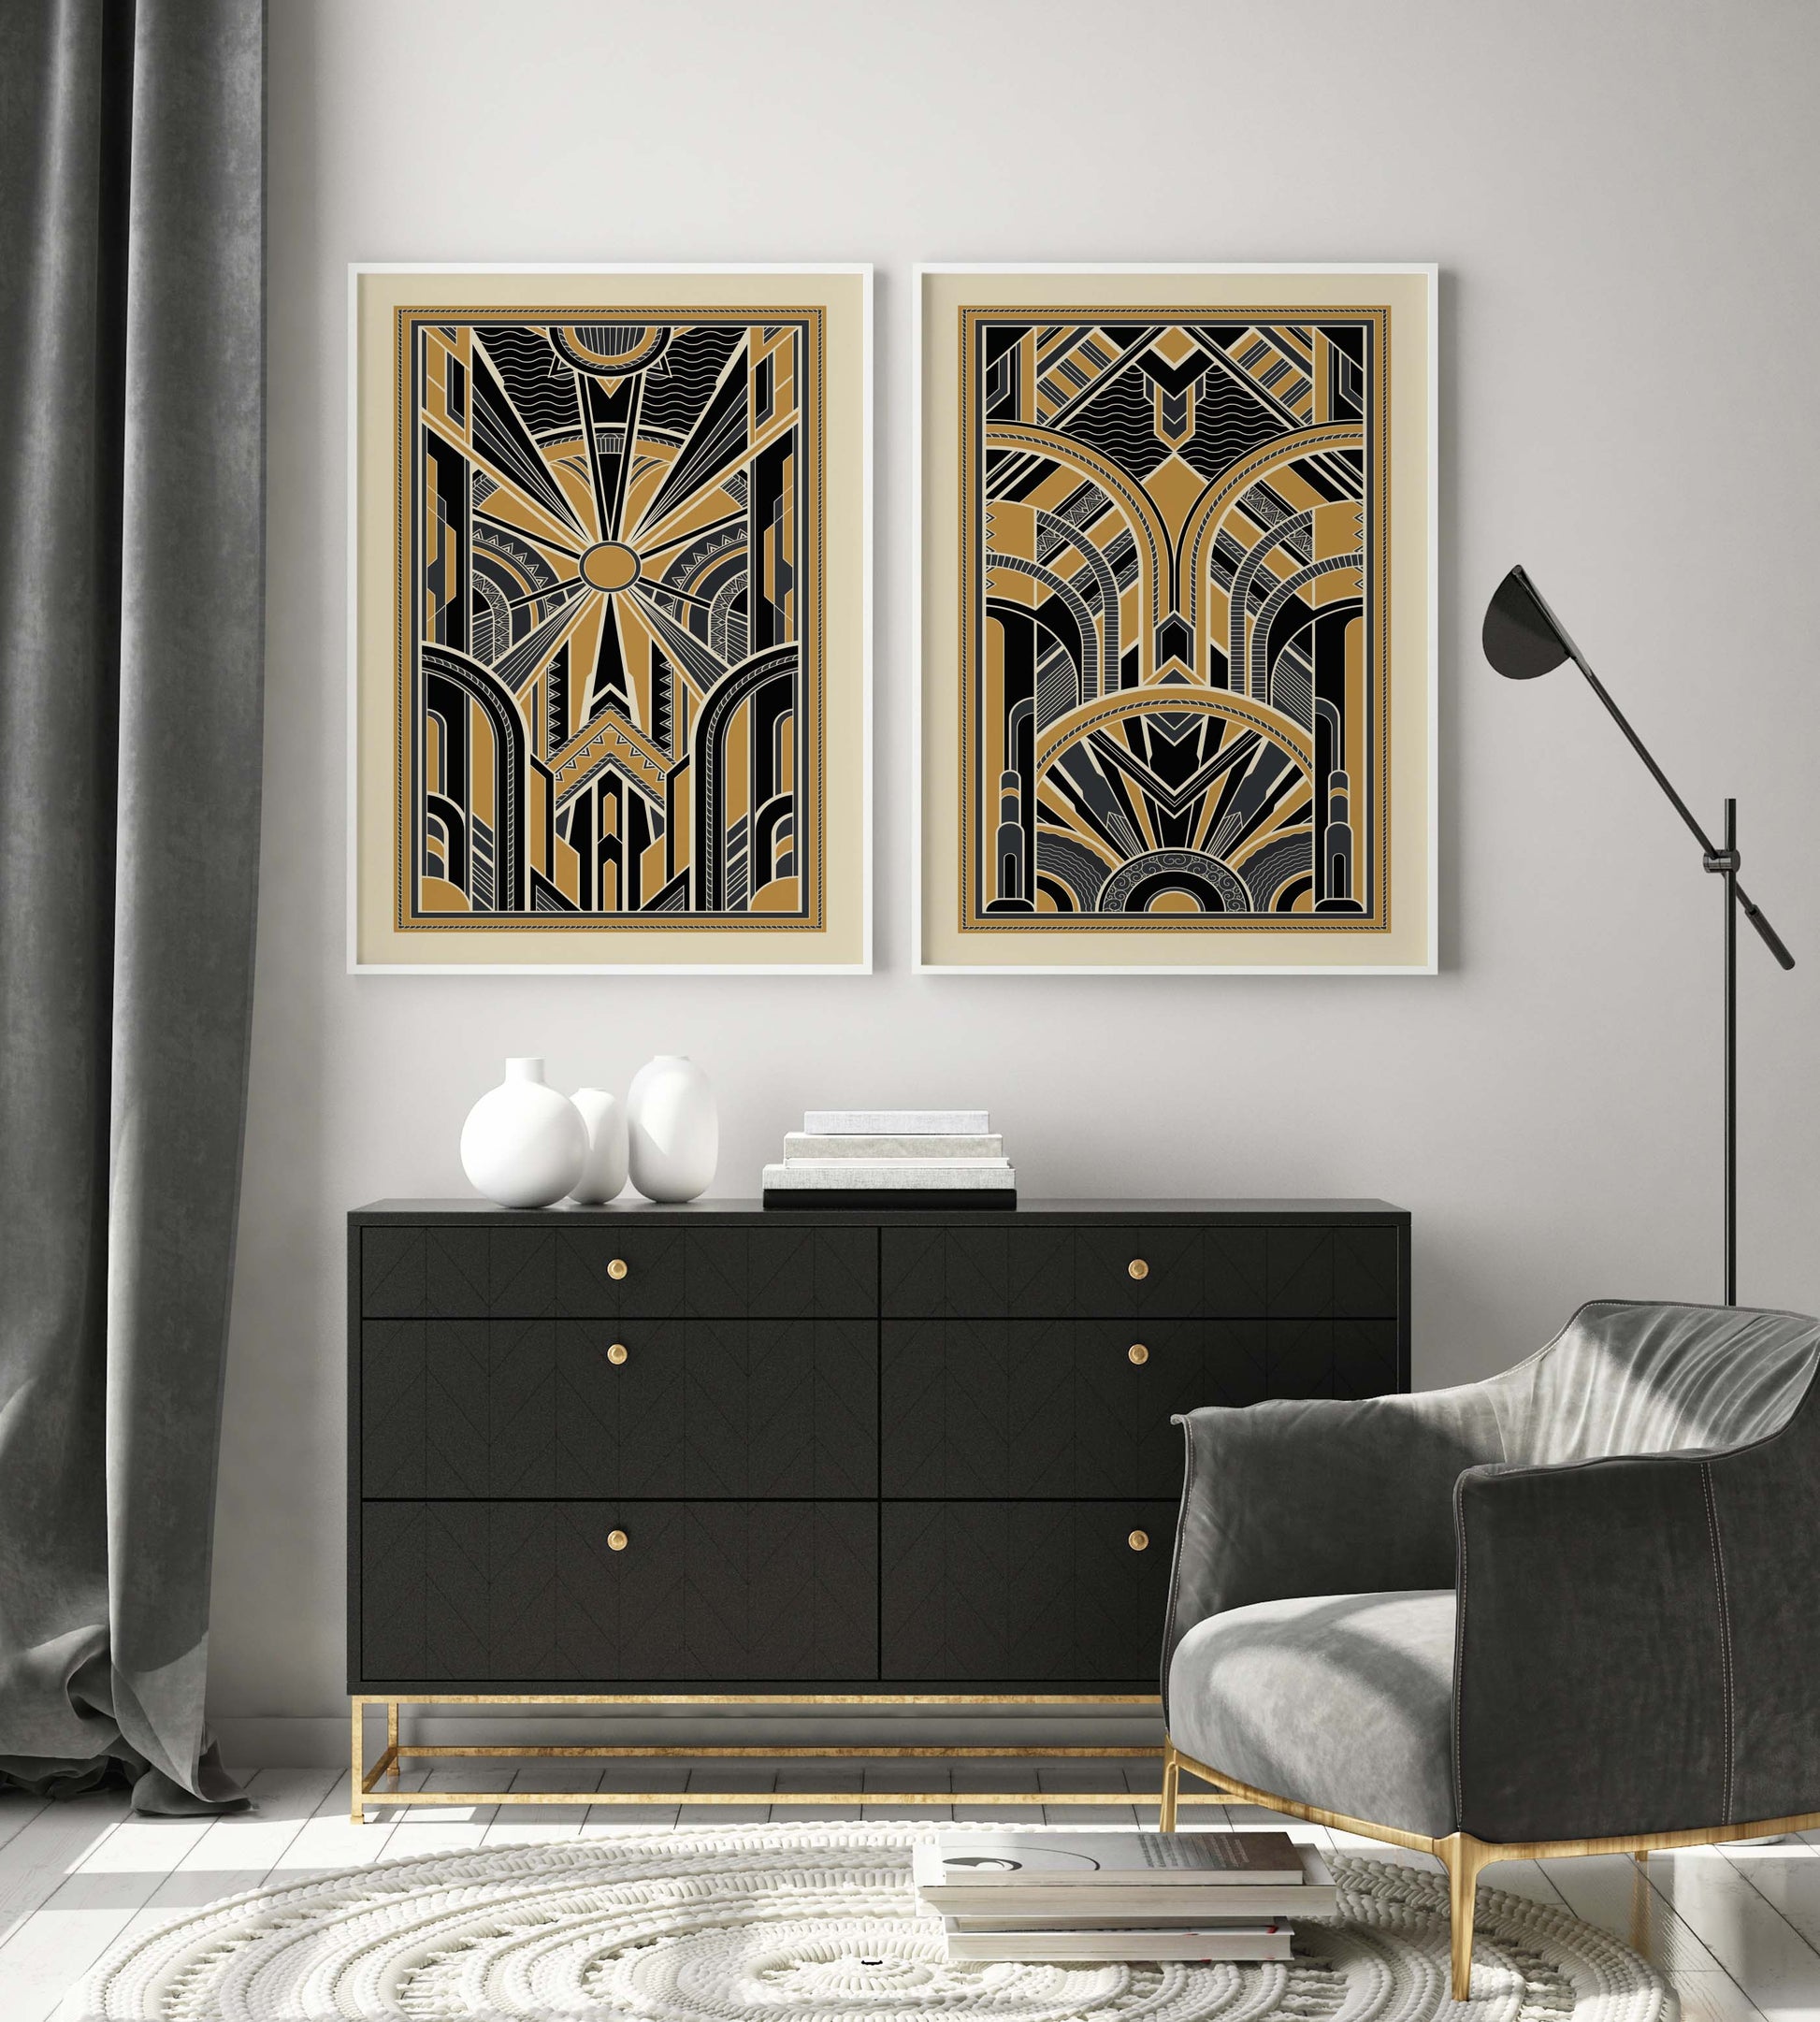 Set of 2 art deco posters with symmetrical pattern in black and gold